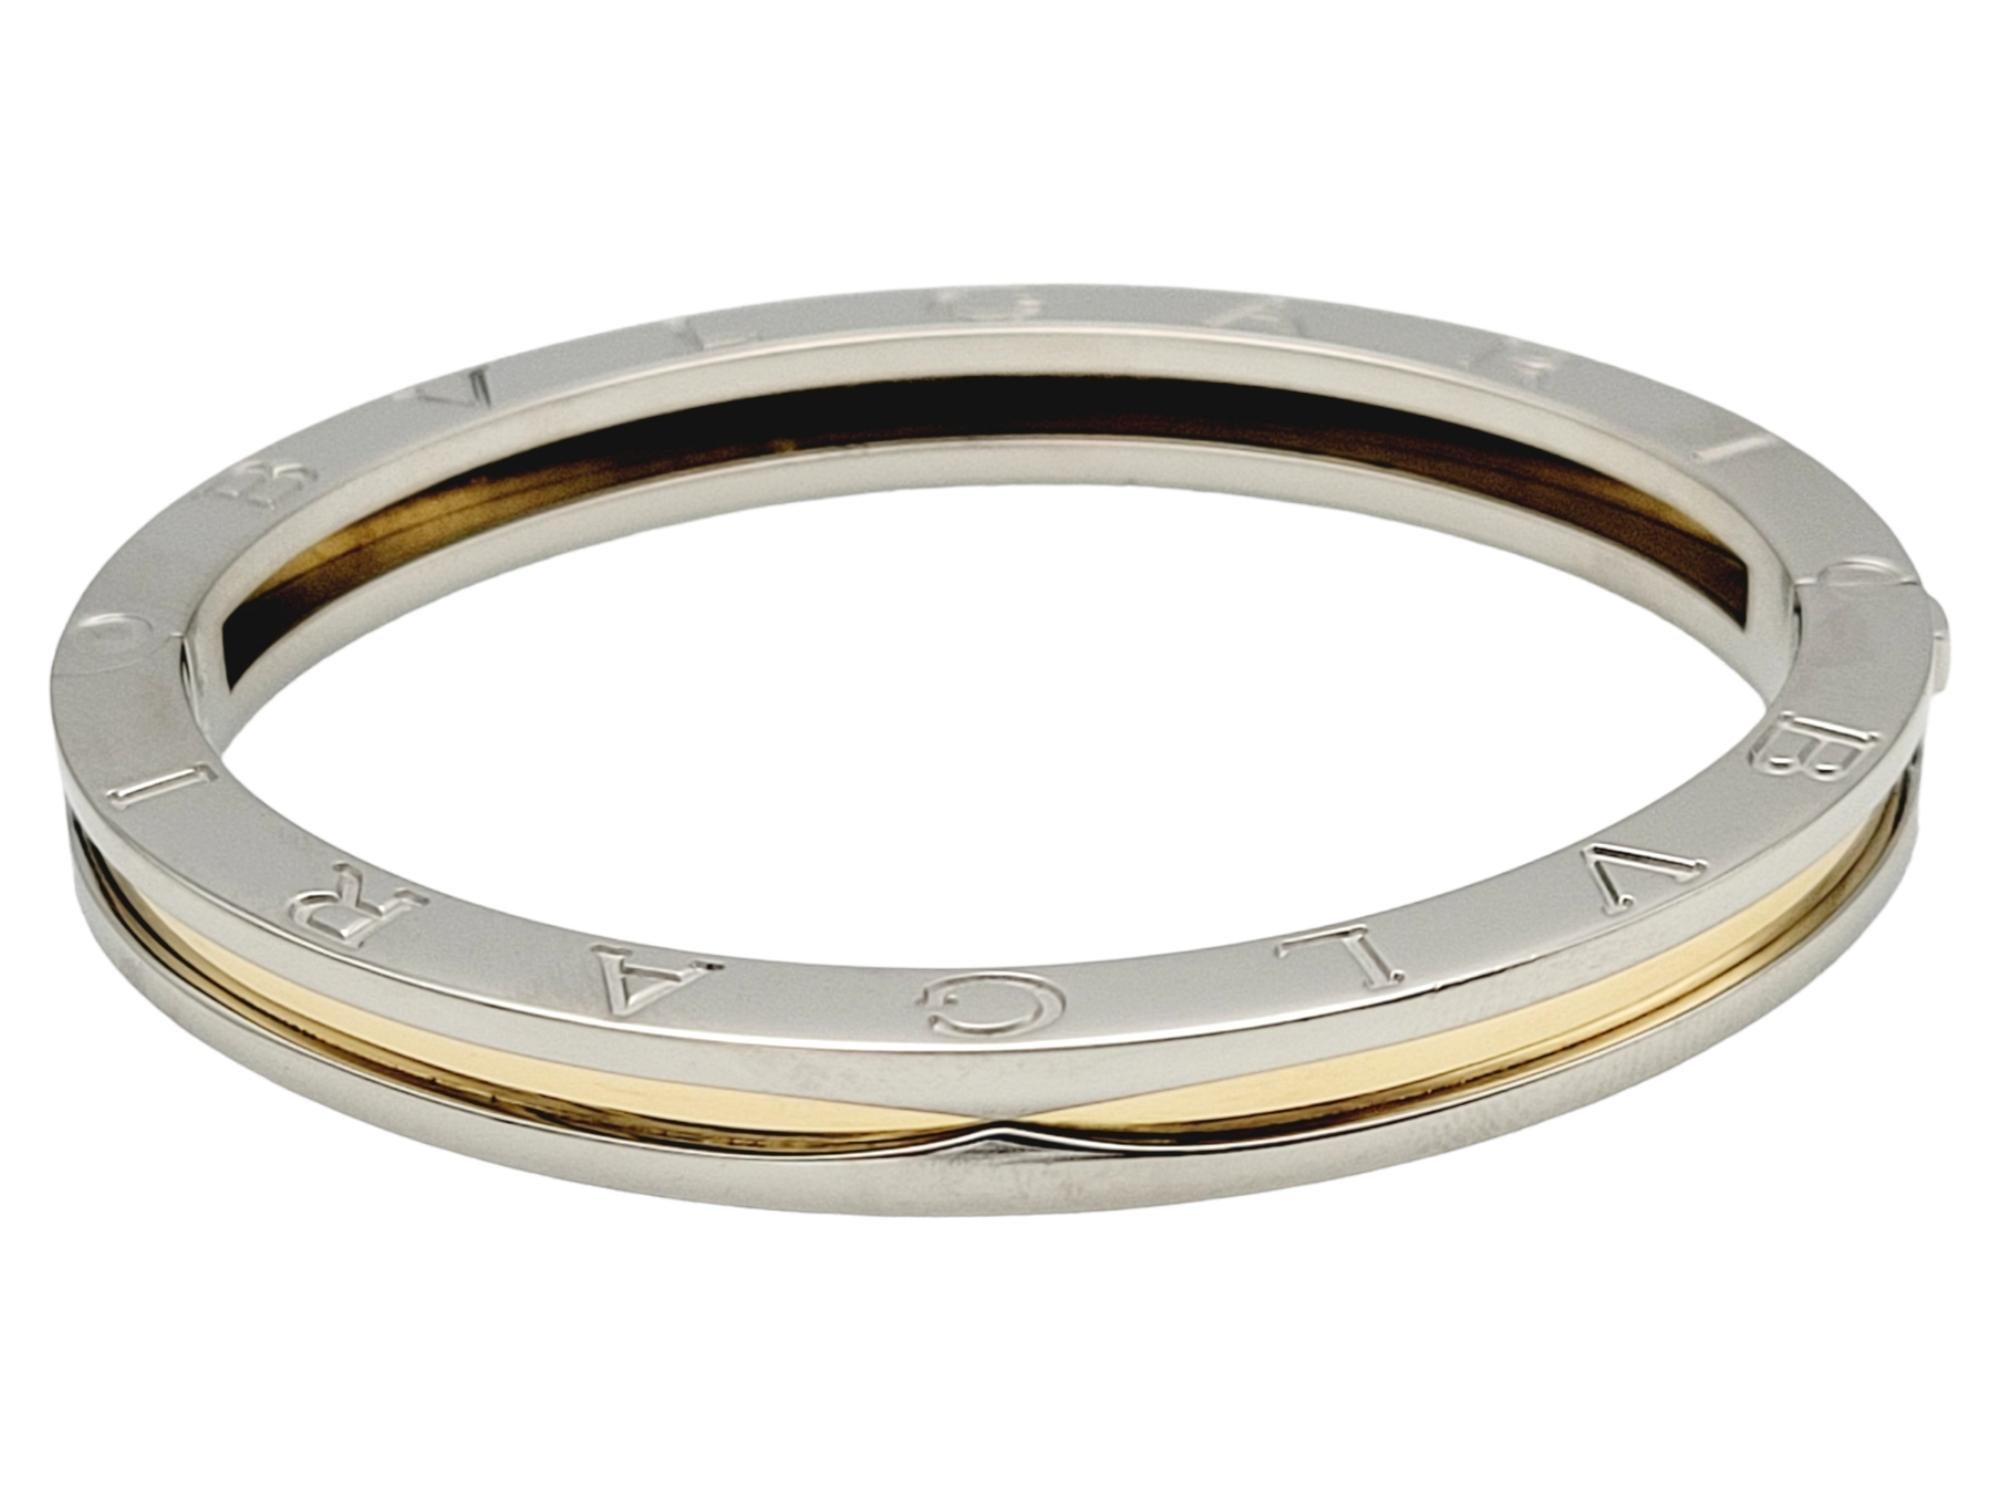 Presenting a stunning Bulgari B.ZERO1 Two-Tone 18-Karat Yellow Gold & Stainless Steel Bangle Bracelet, a true masterpiece of Italian craftsmanship. This exquisite piece showcases a seamless blend of 18-karat yellow gold and stainless steel, creating